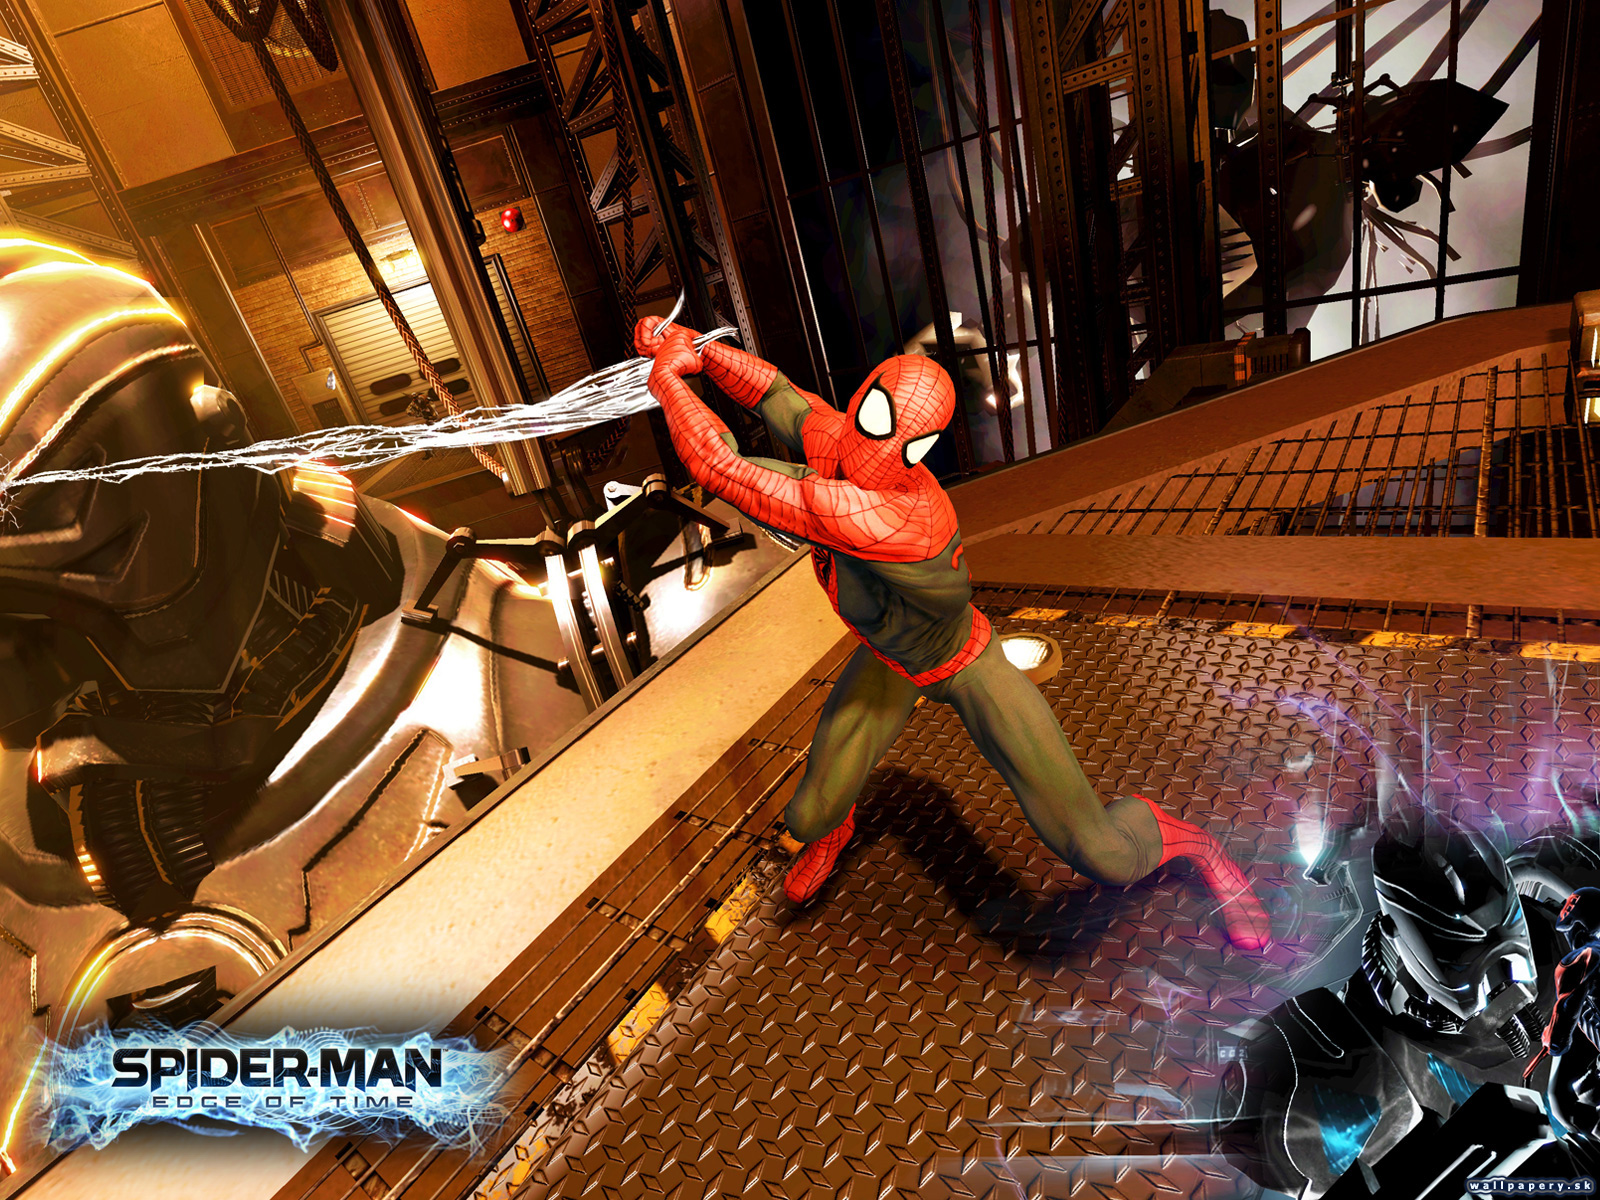 Spider-Man: Edge of Time - wallpaper 3